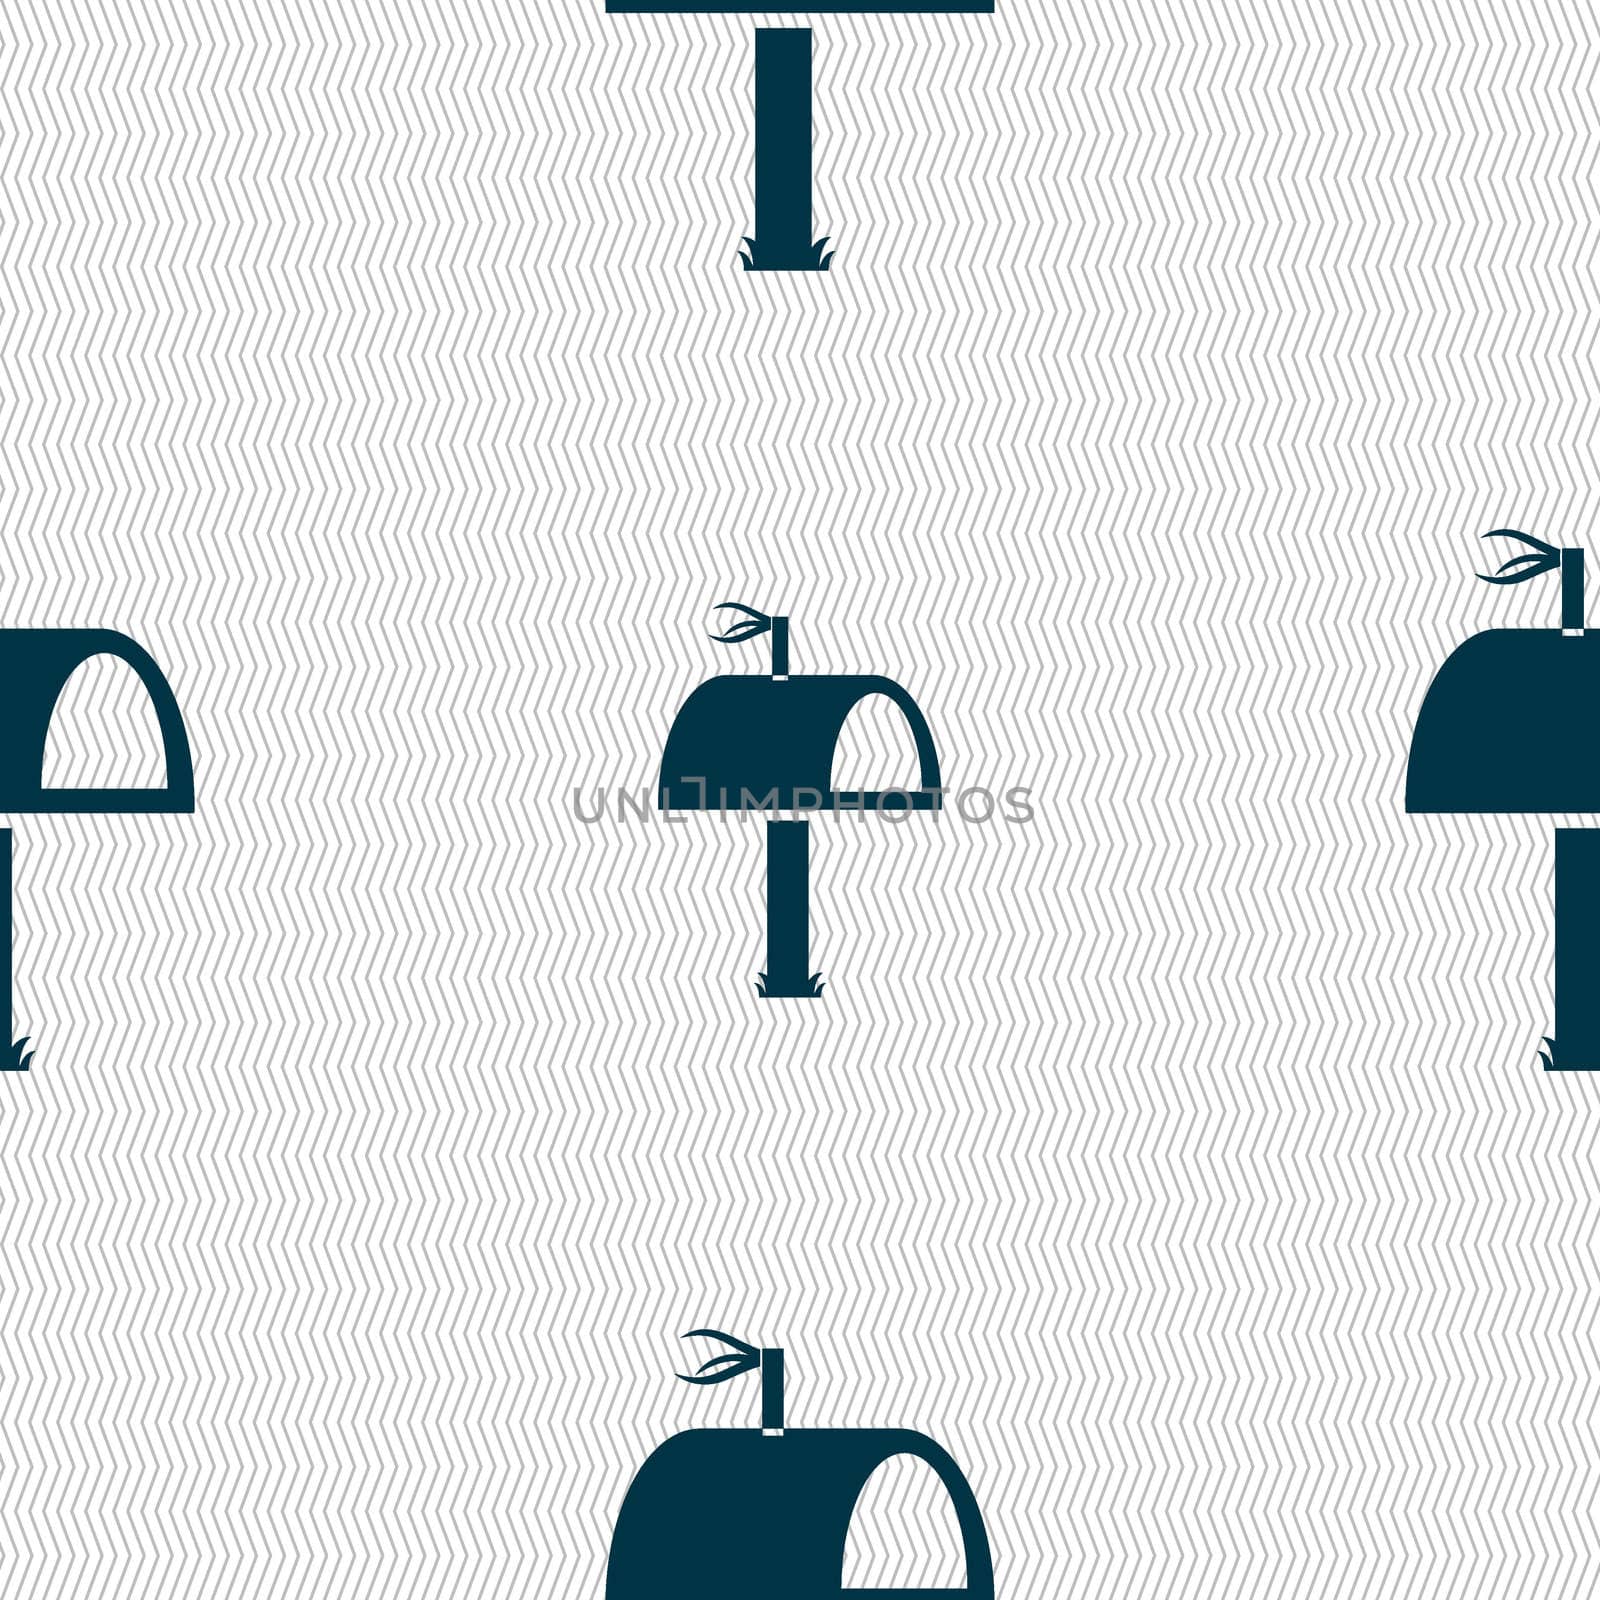 Mailbox icon sign. Seamless abstract background with geometric shapes. illustration